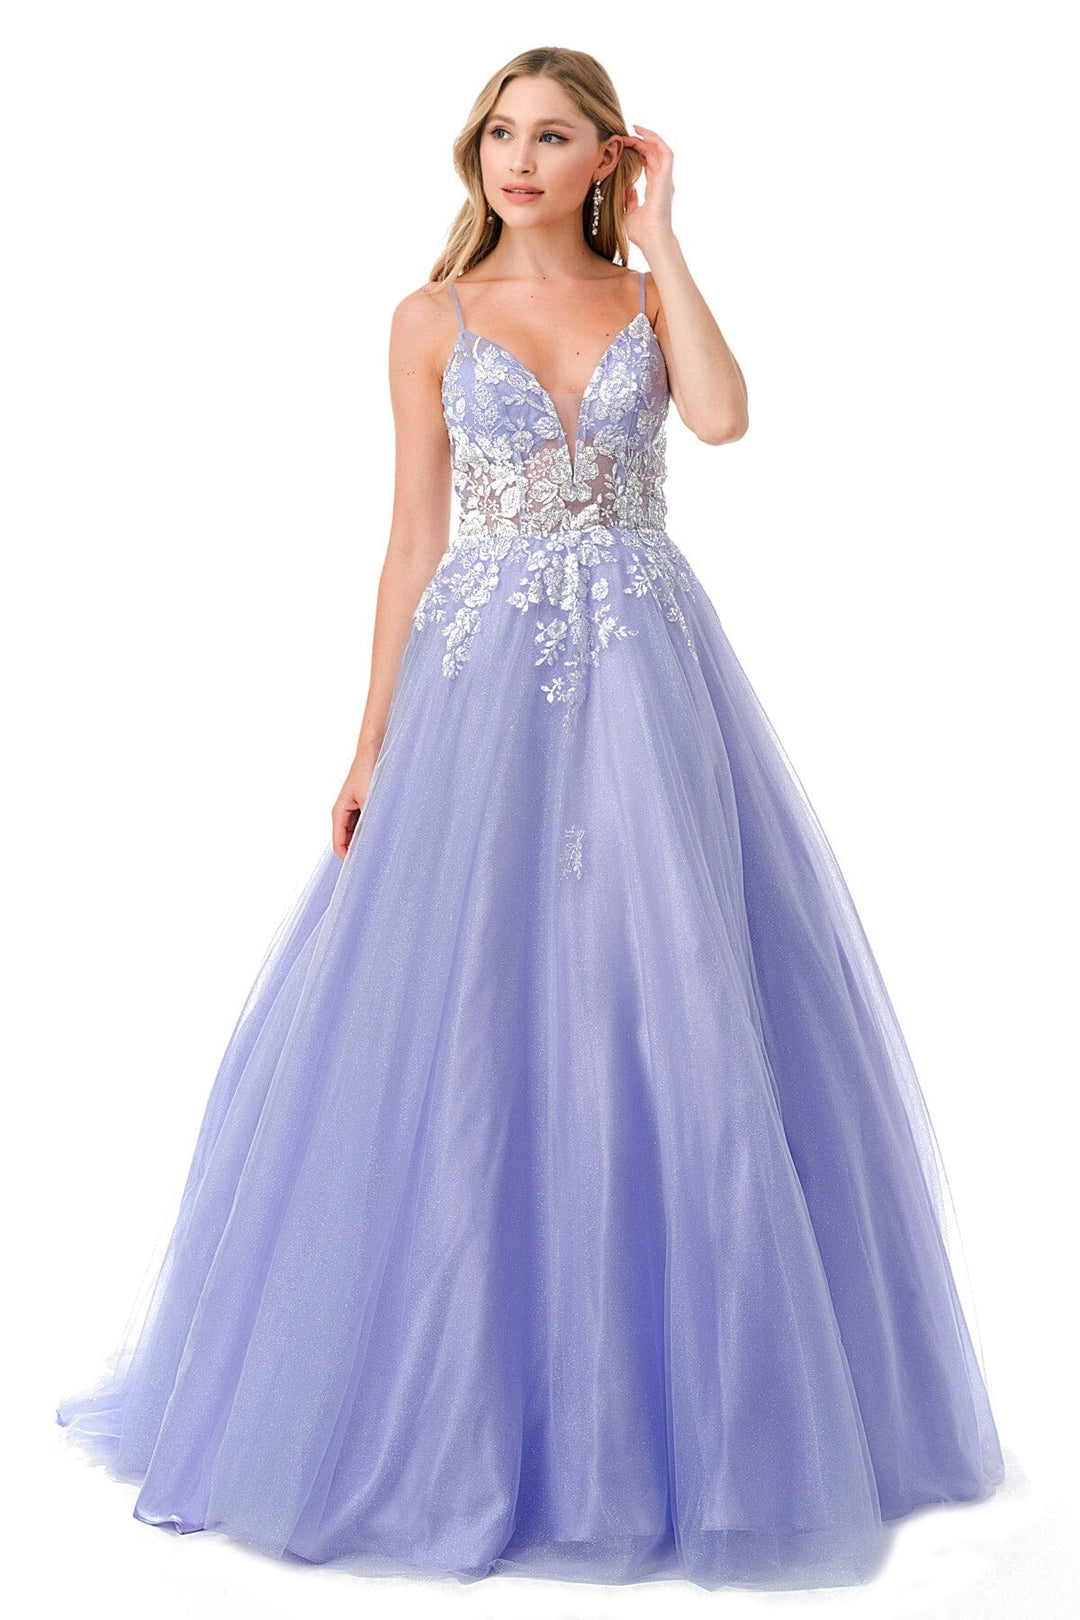 Applique Sweetheart Tulle Gown by Coya L2791B